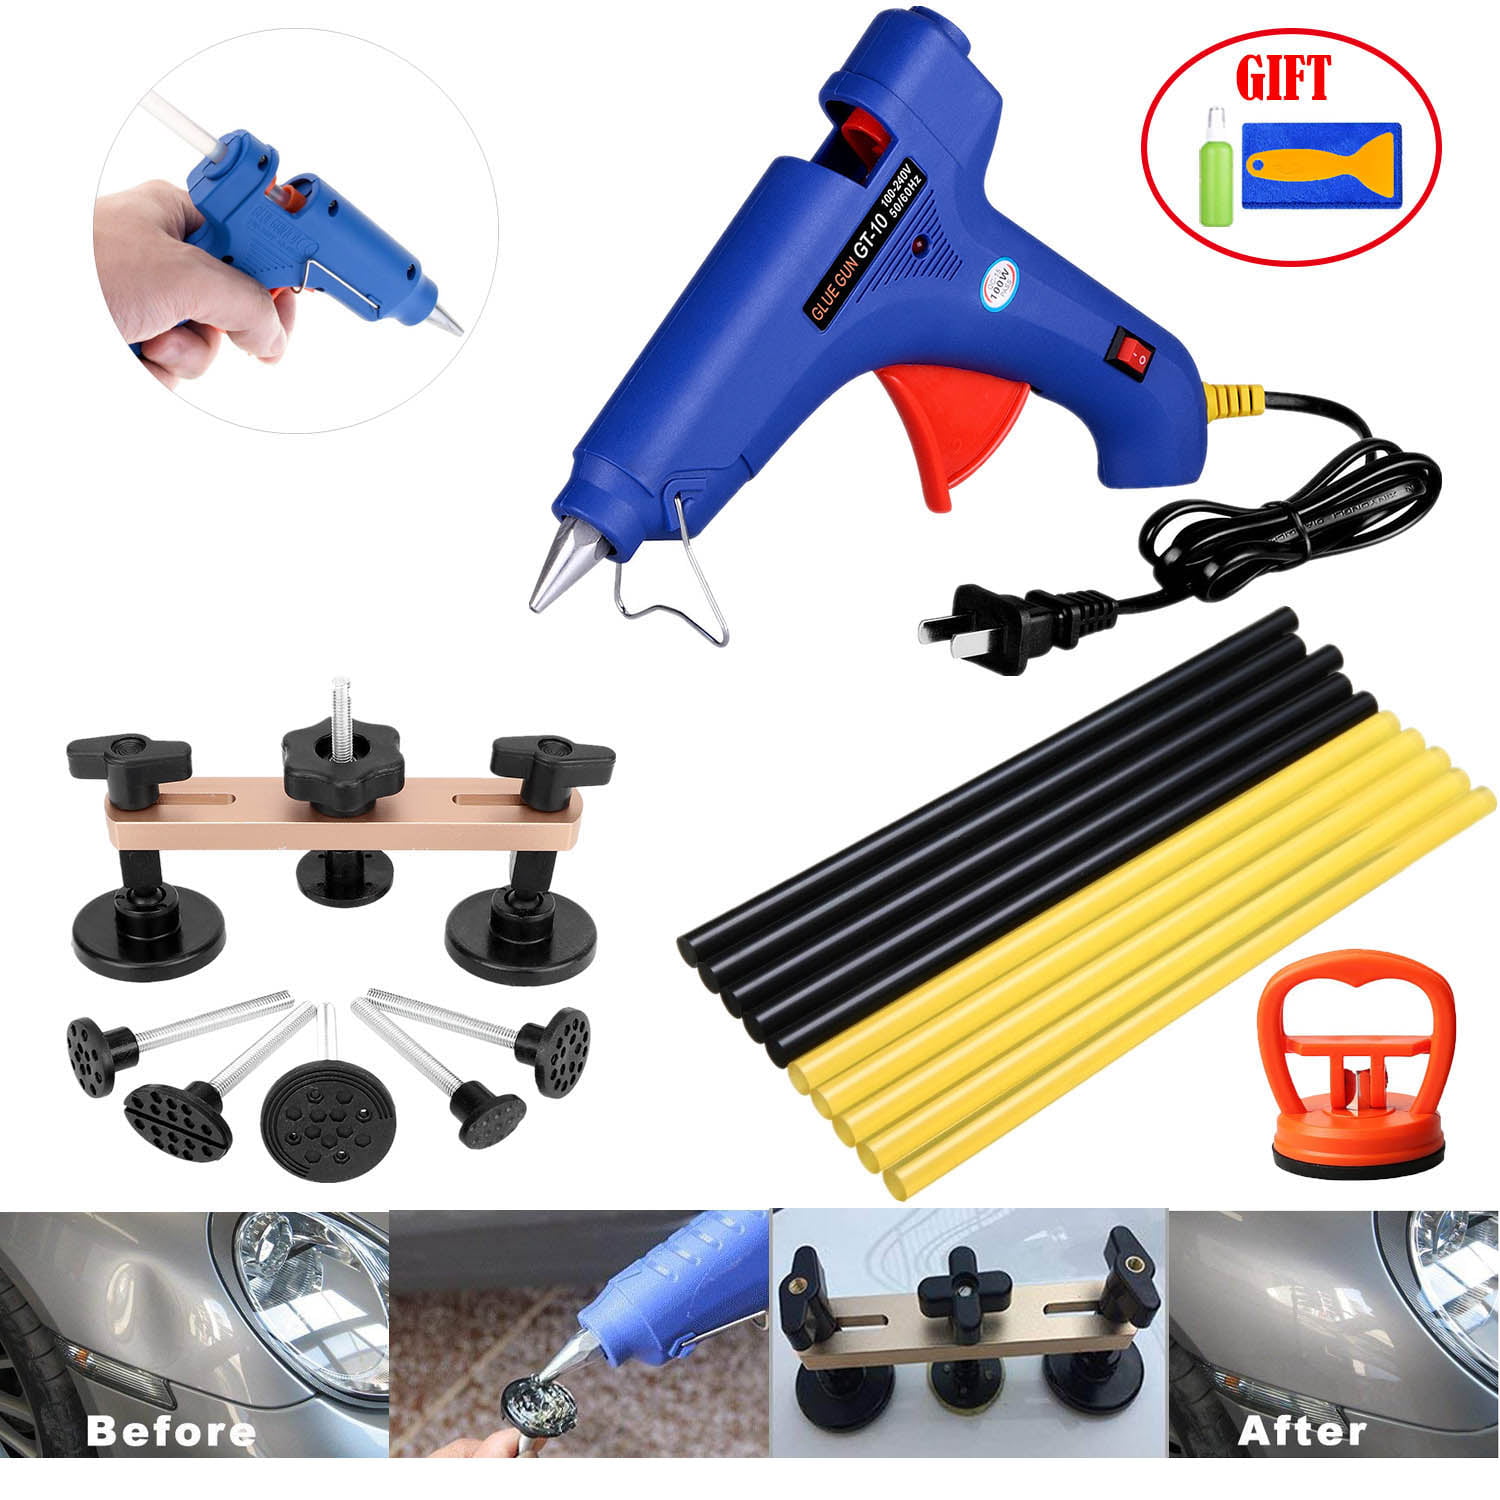 Glue Shovel for Auto Dent Removal,Minor dents 24PCS Car Body Dent Puller Remover Repair Kits with Glue Sticks Glue Puller Door Dings and Hail Damage WANYIG Paintless Dent Repair Tools 